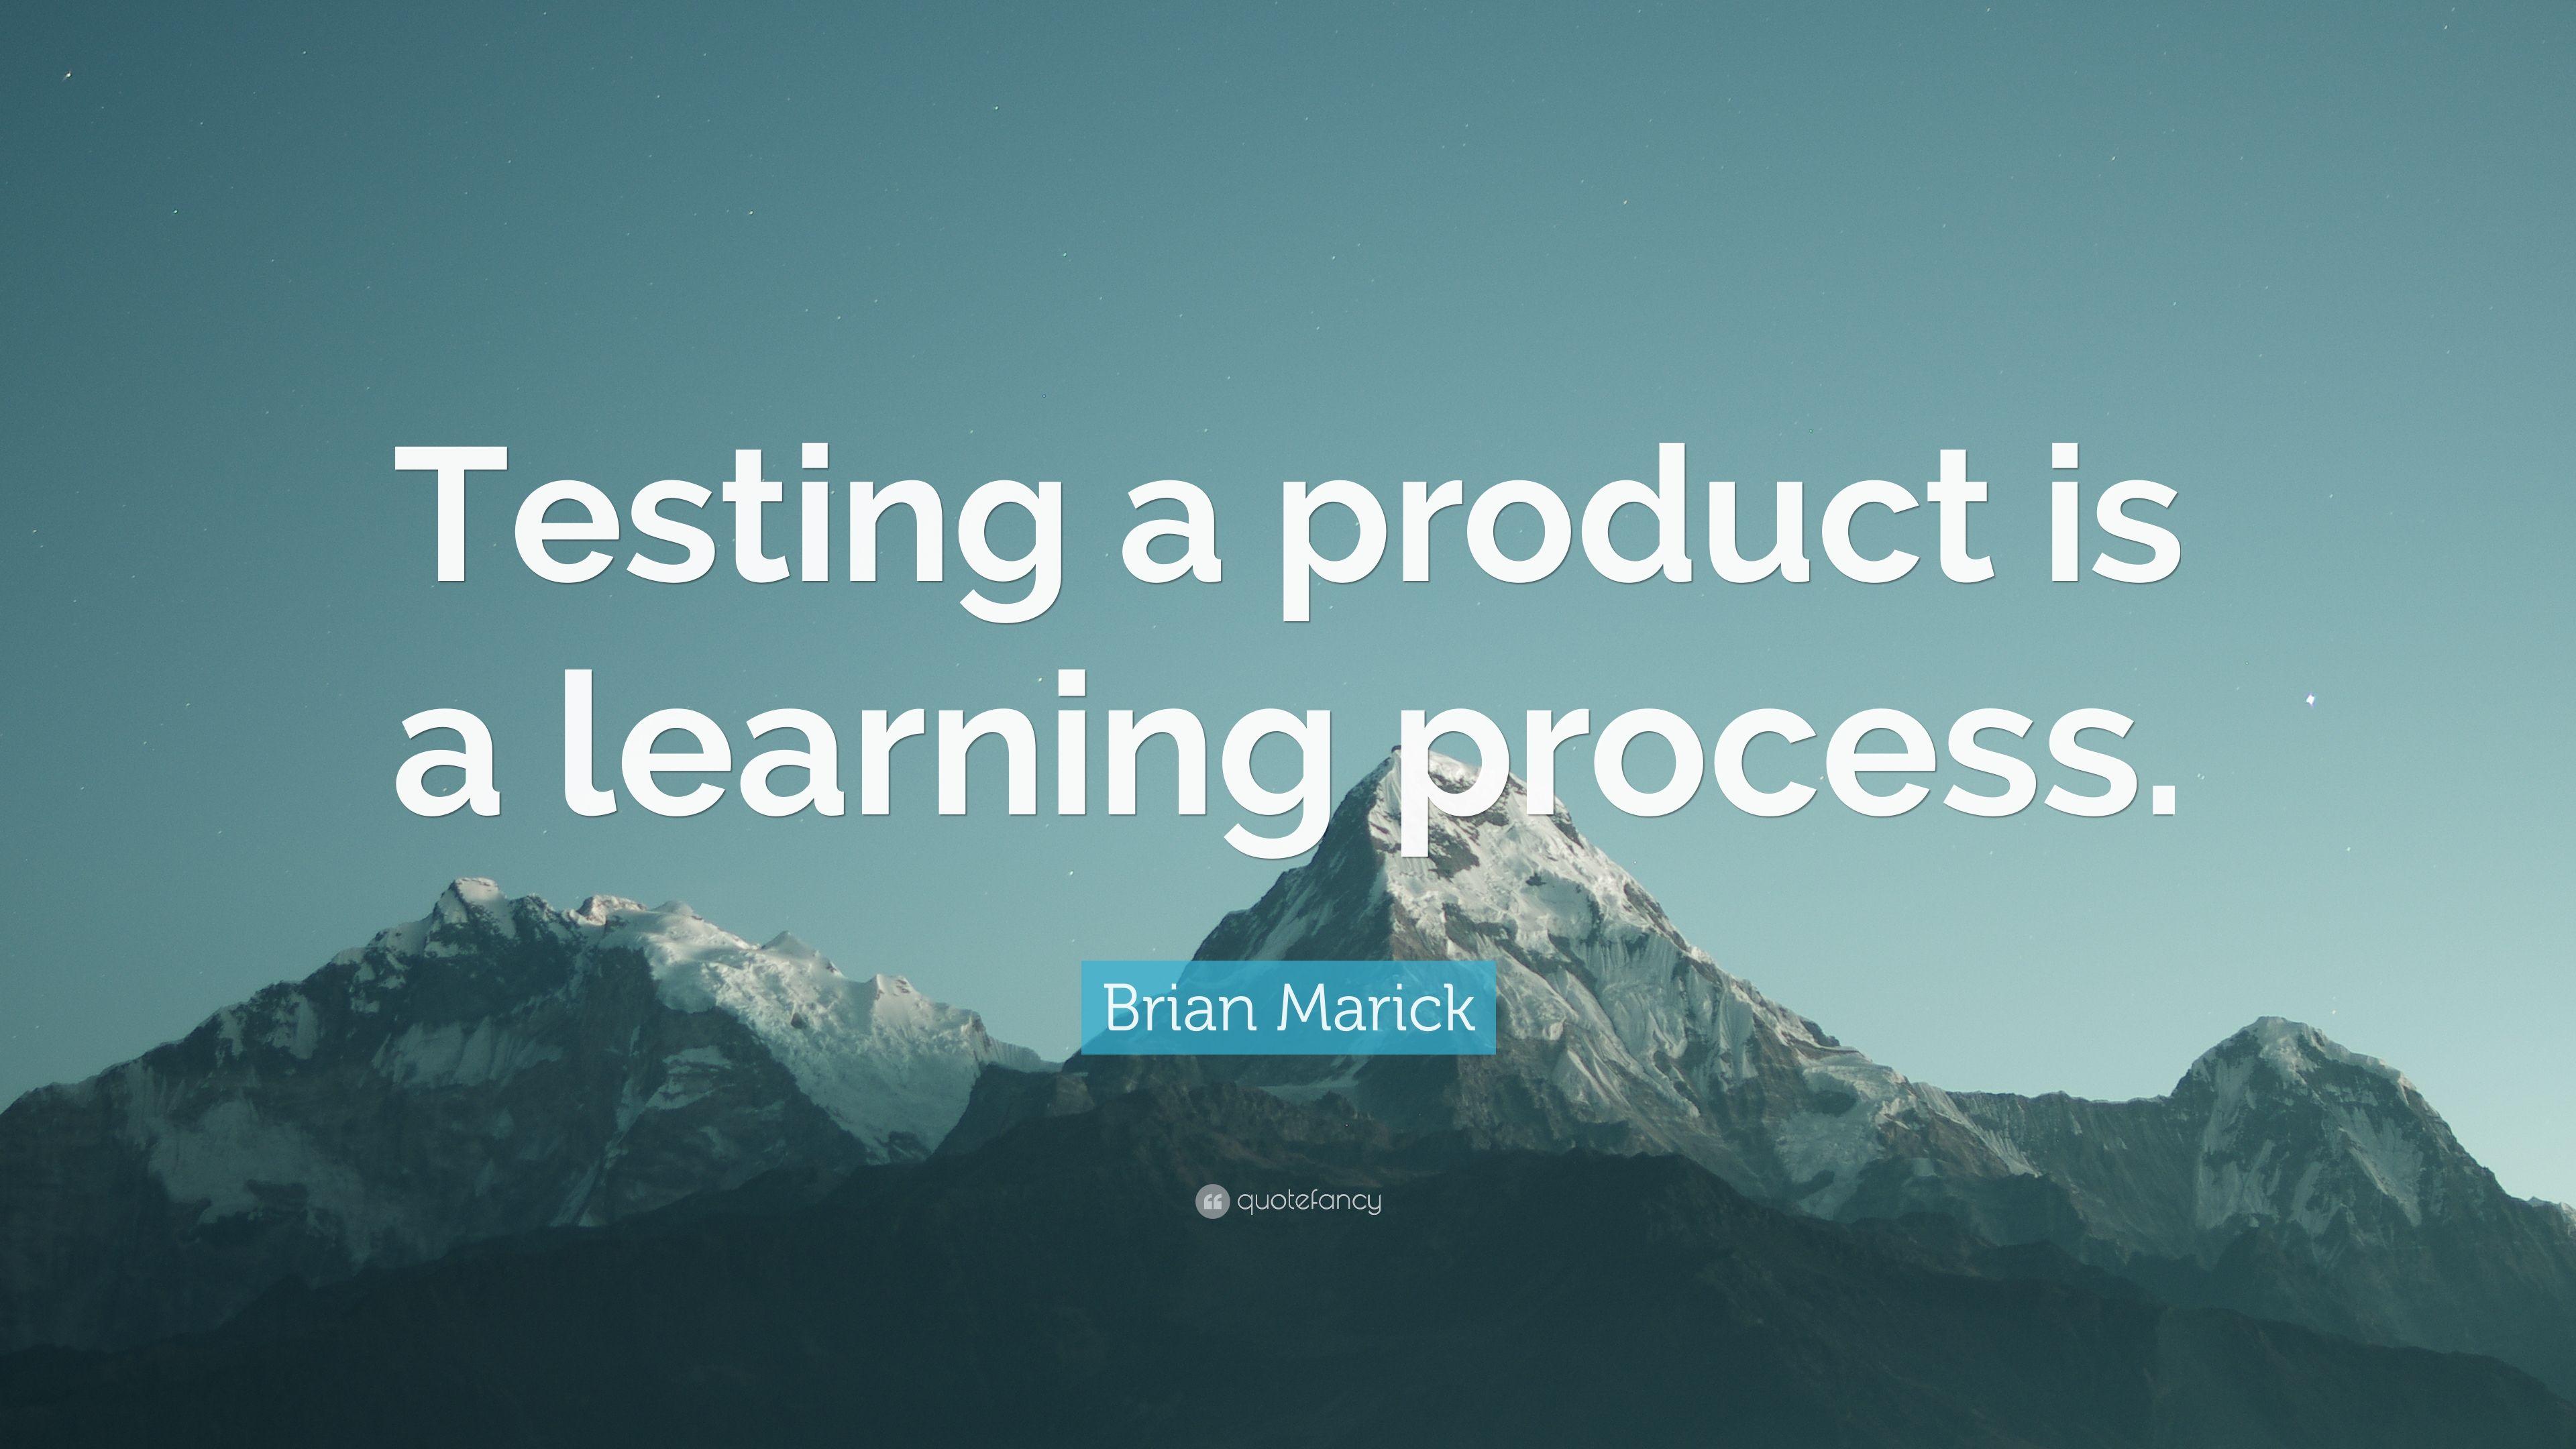 Brian Marick Quote: “Testing a product is a learning process.” 7